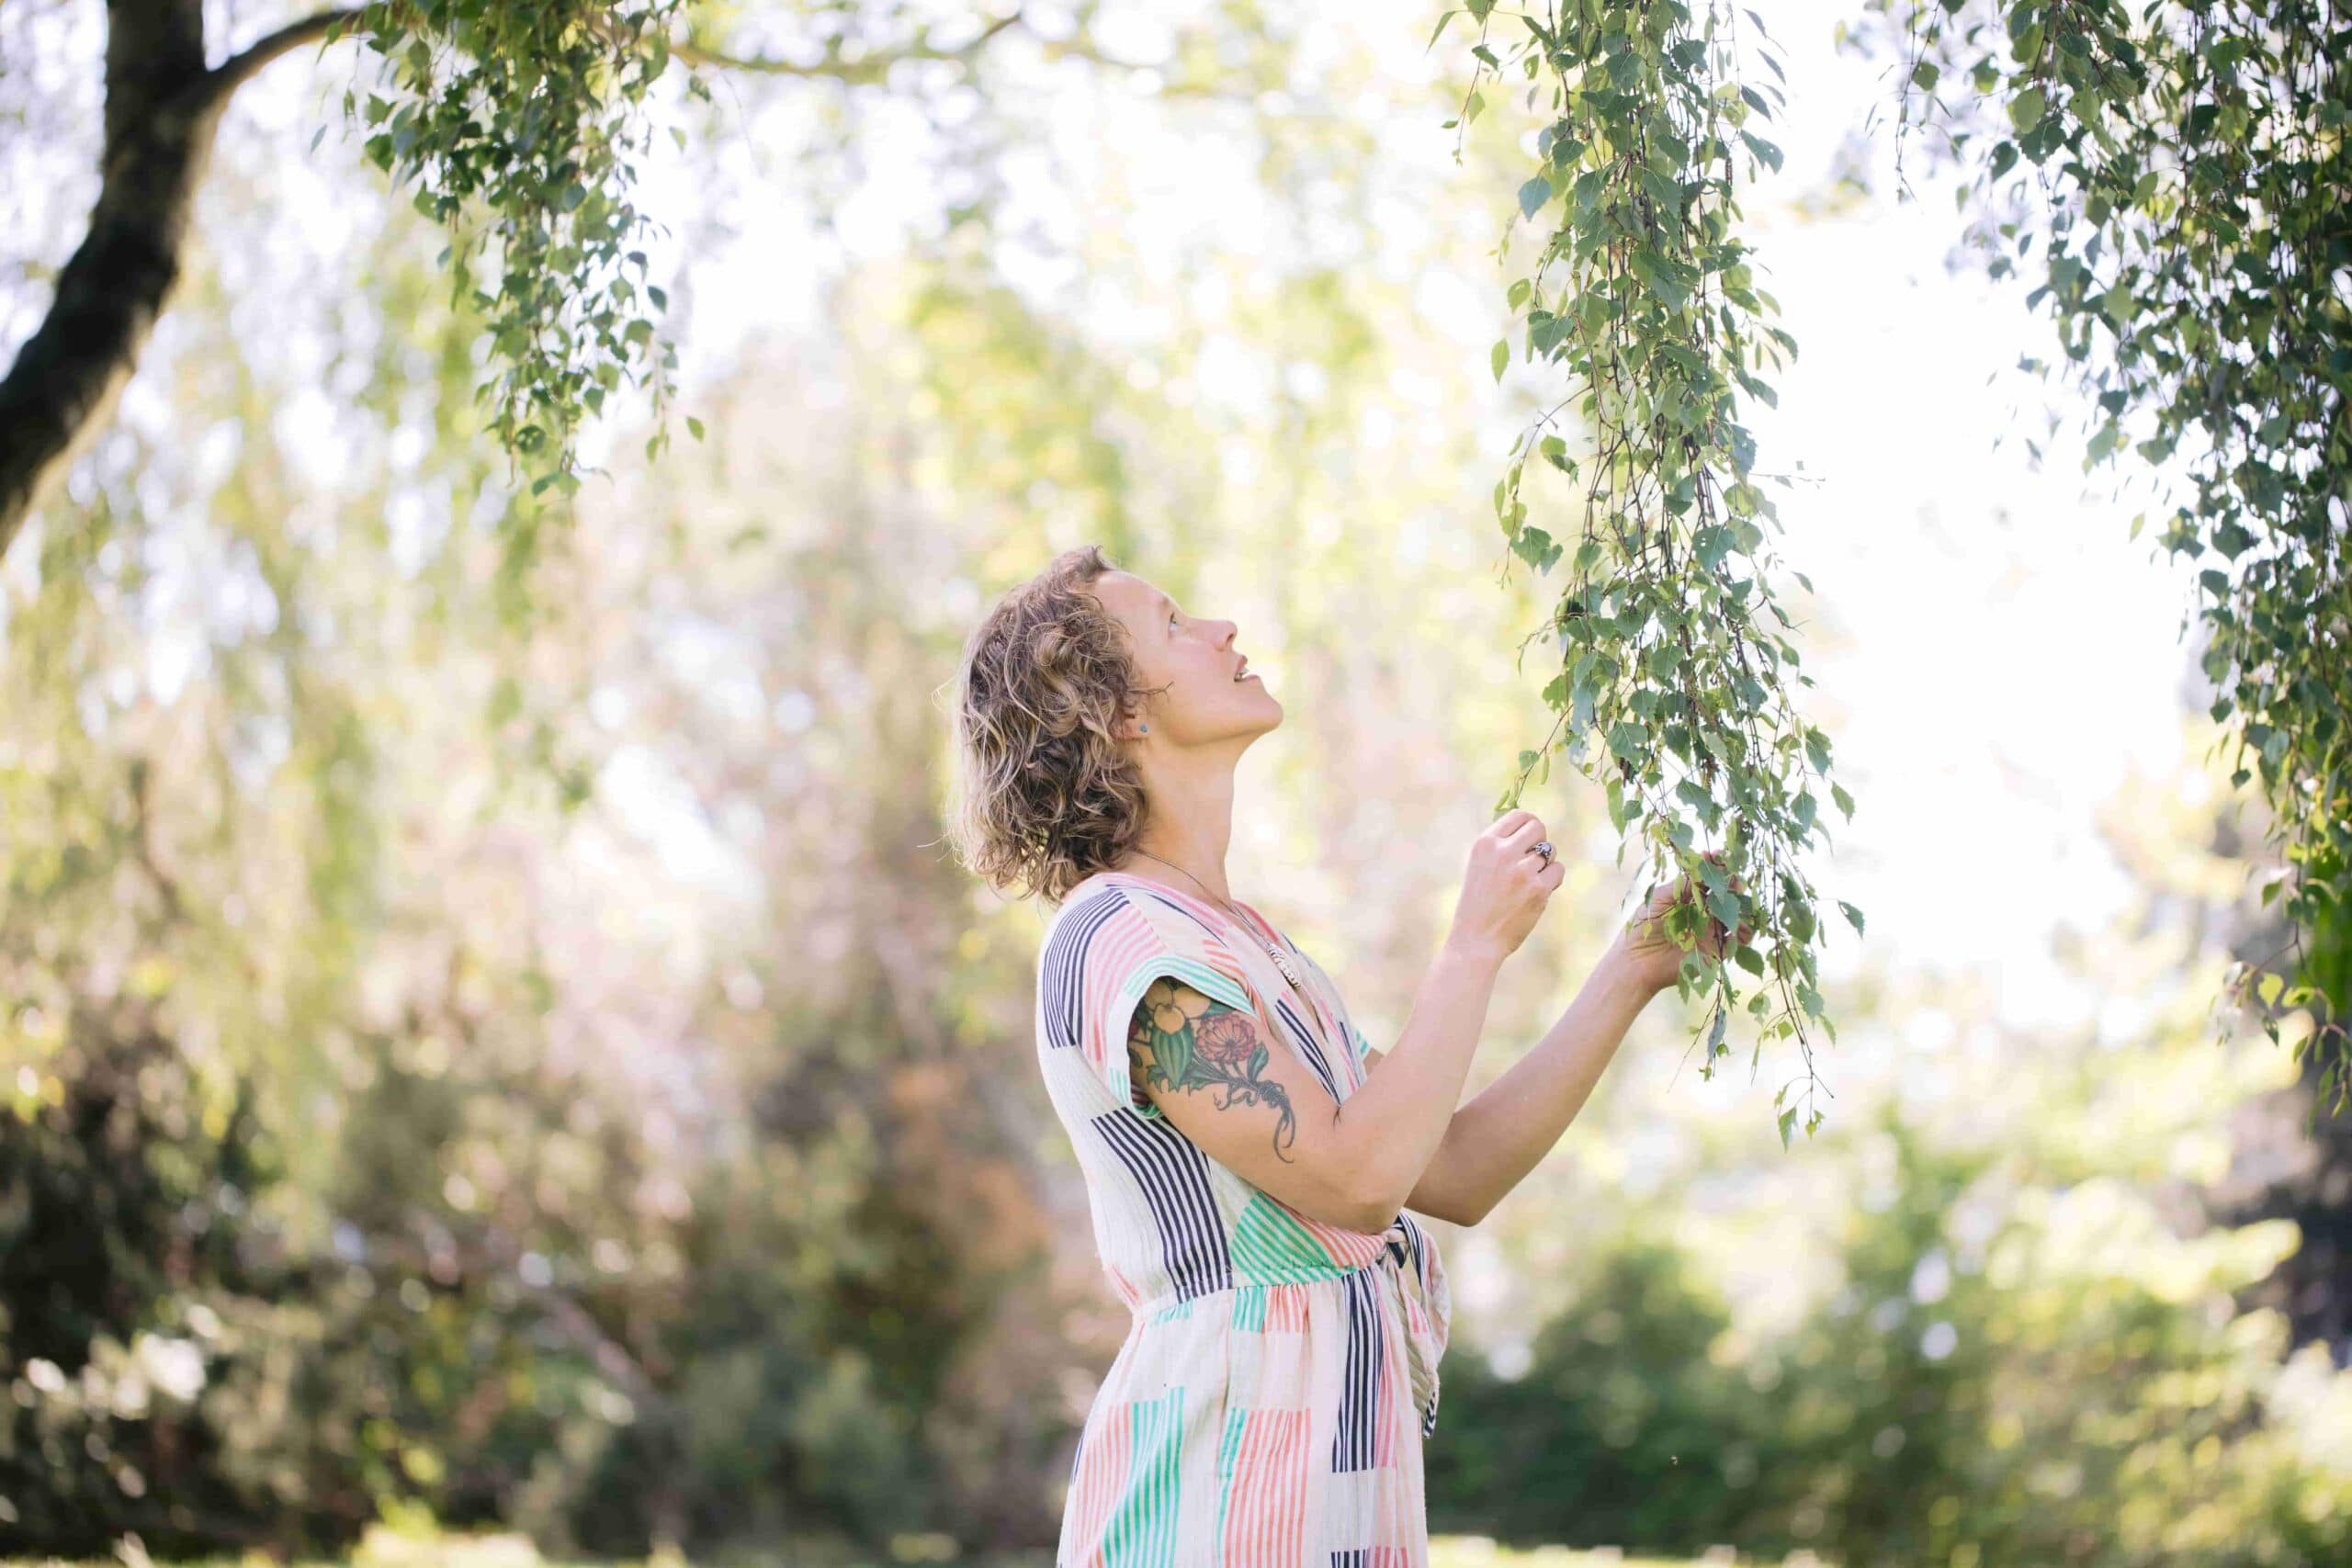 Dr. Sarah Sue Myers teaches Plant Medicine and connects the self to nature.